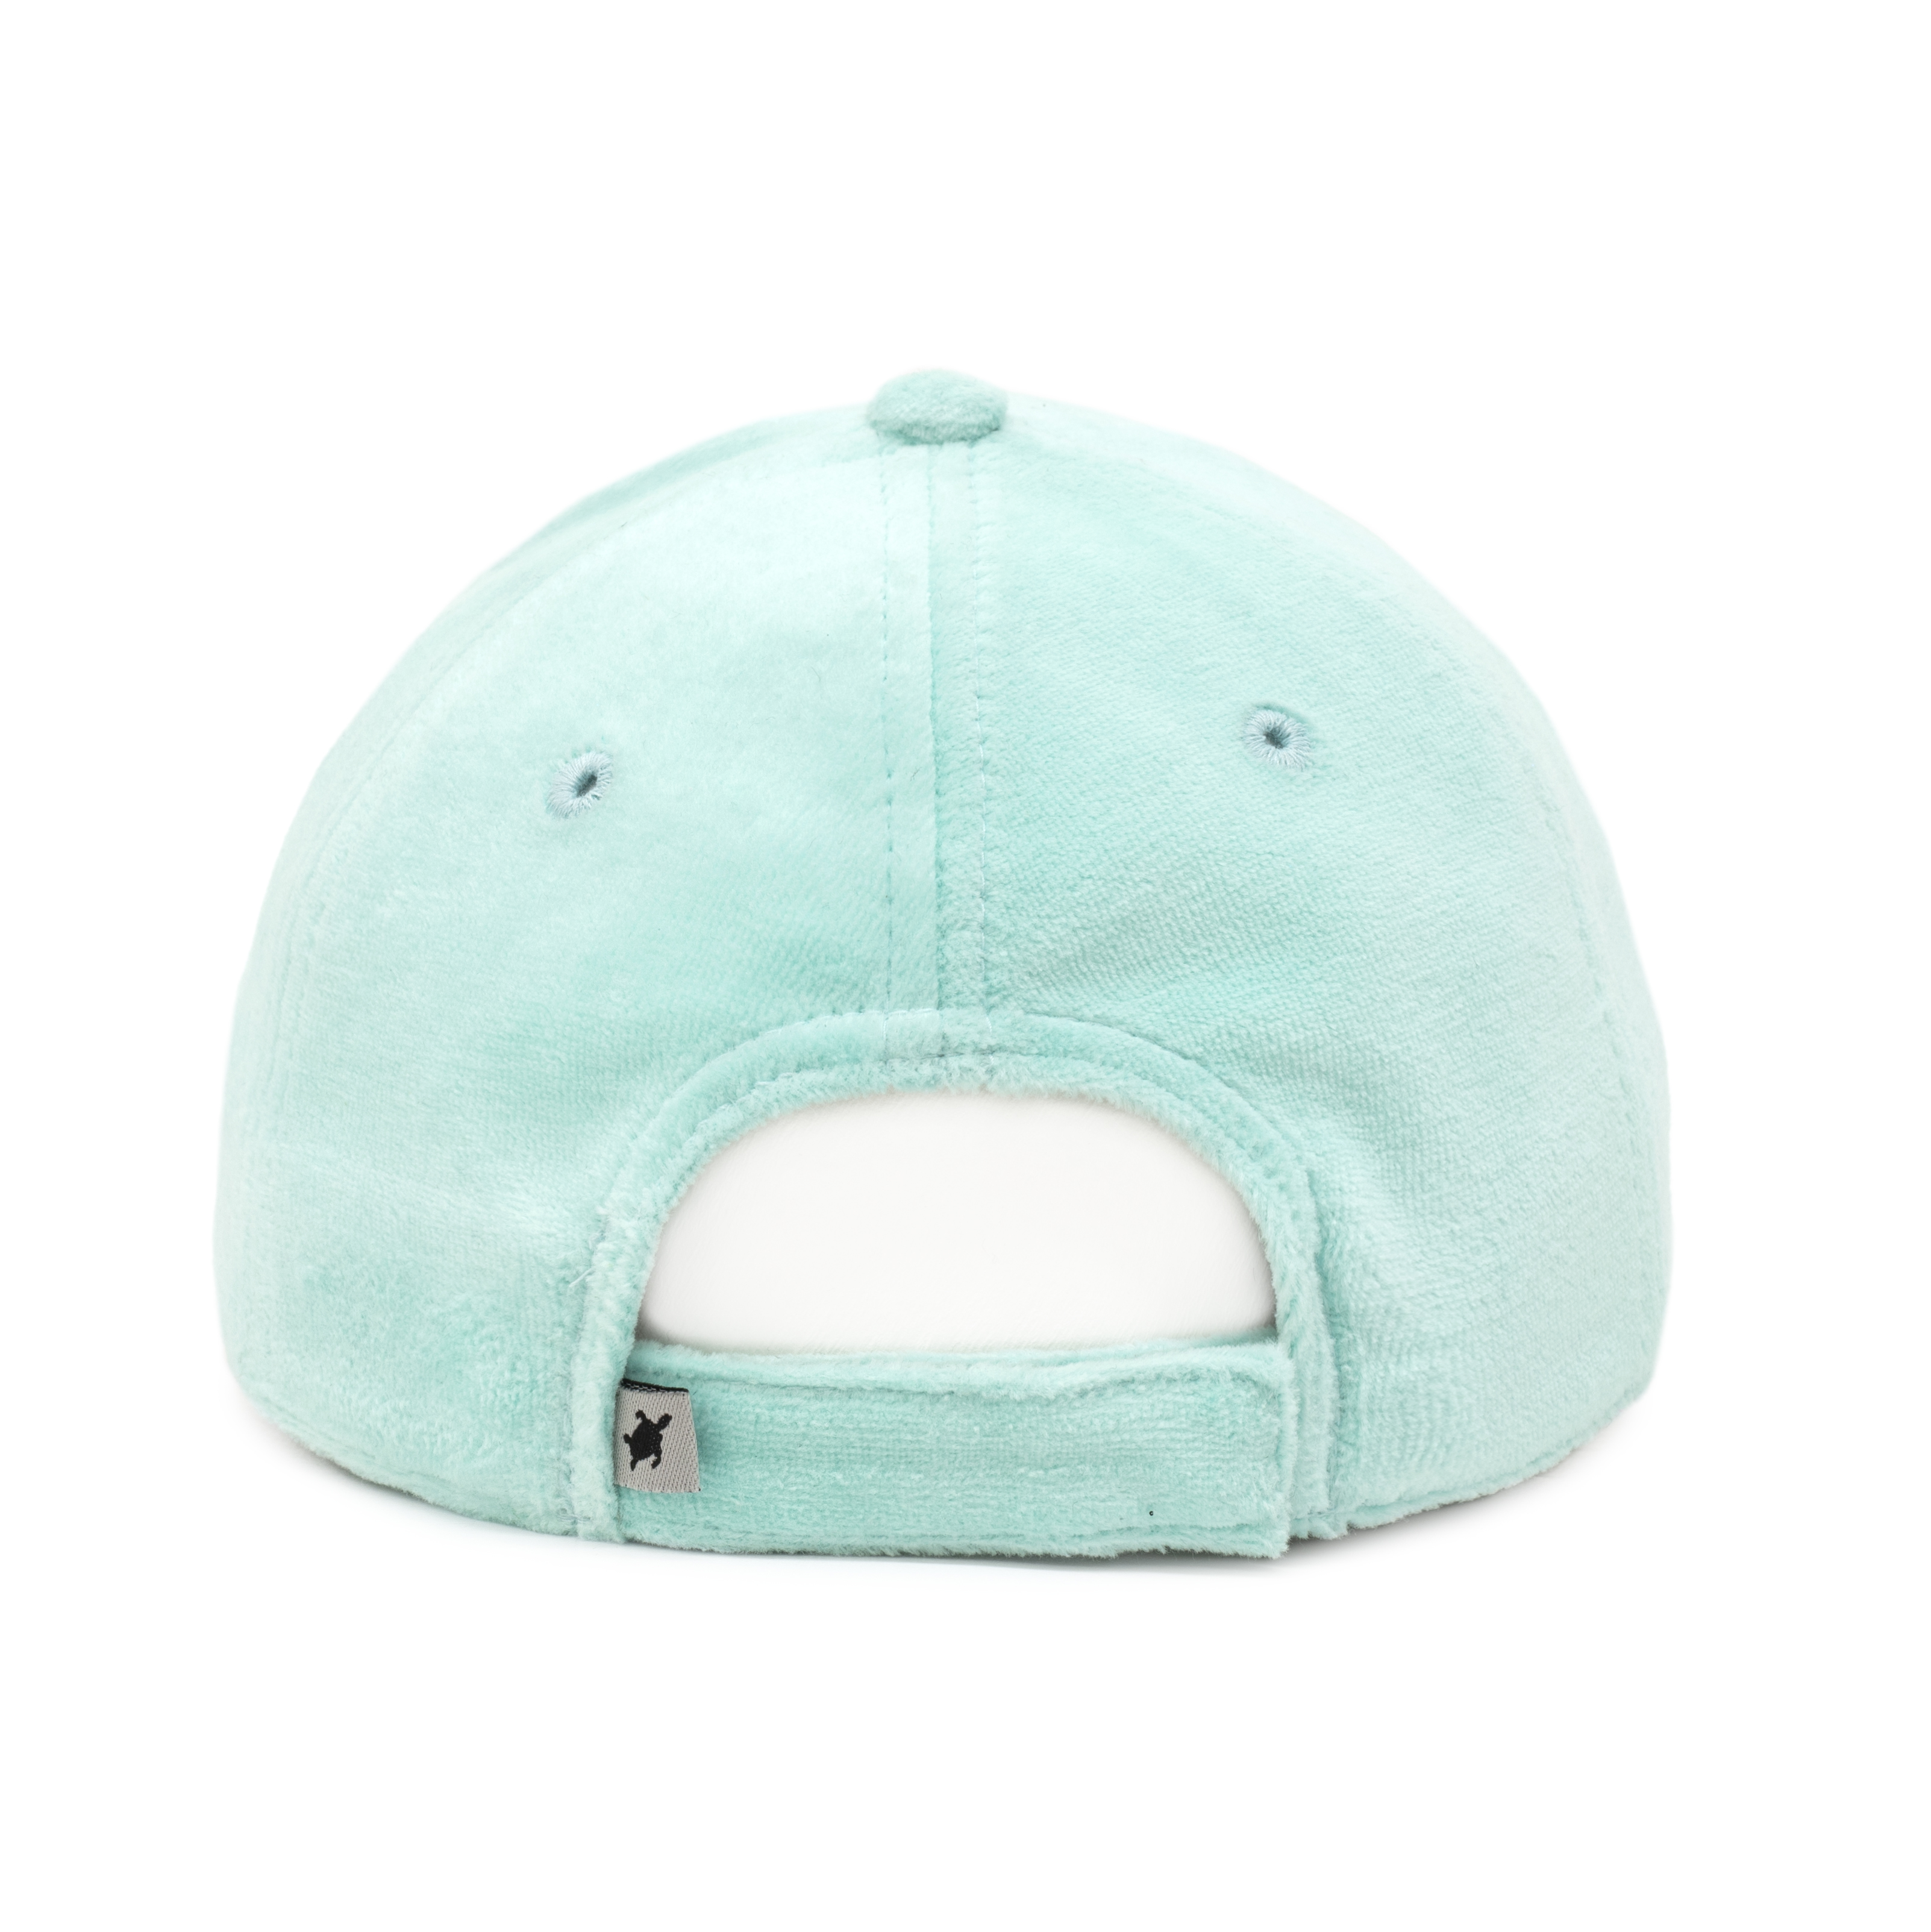 Smith & Miller Perris Women Curved Cap, turquoise